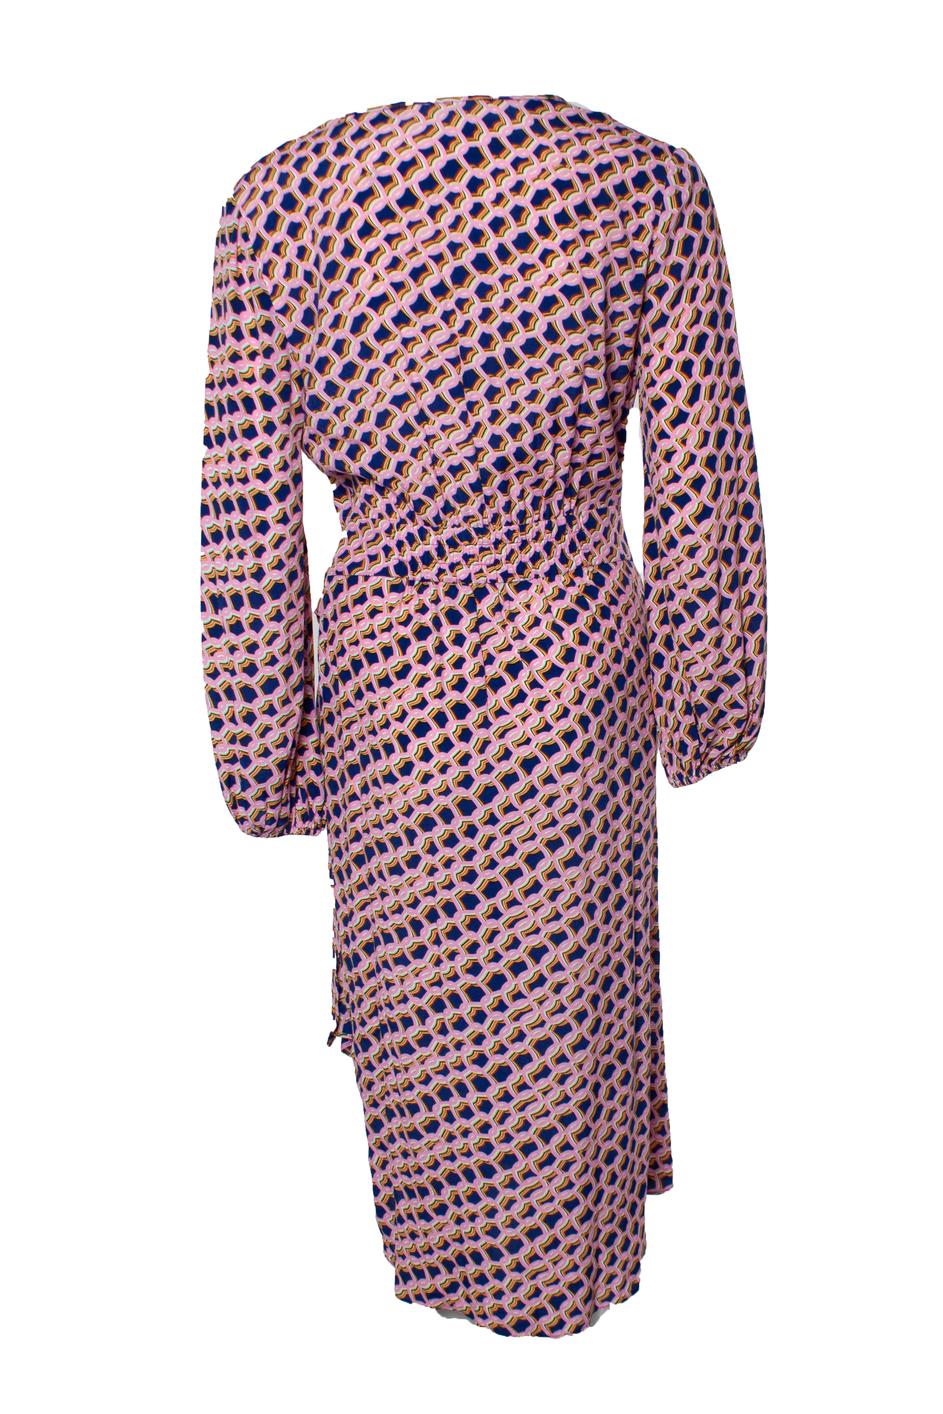 Diane Von Furstenberg, Midi dress with graphic print in pink and purple. The item is in very good condition.

• CONDITION: very good condition 

• SIZE: US6- S 

• MEASUREMENTS: length 114 cm, width 40 cm, waist 34 cm, shoulder width 44 cm, sleeve